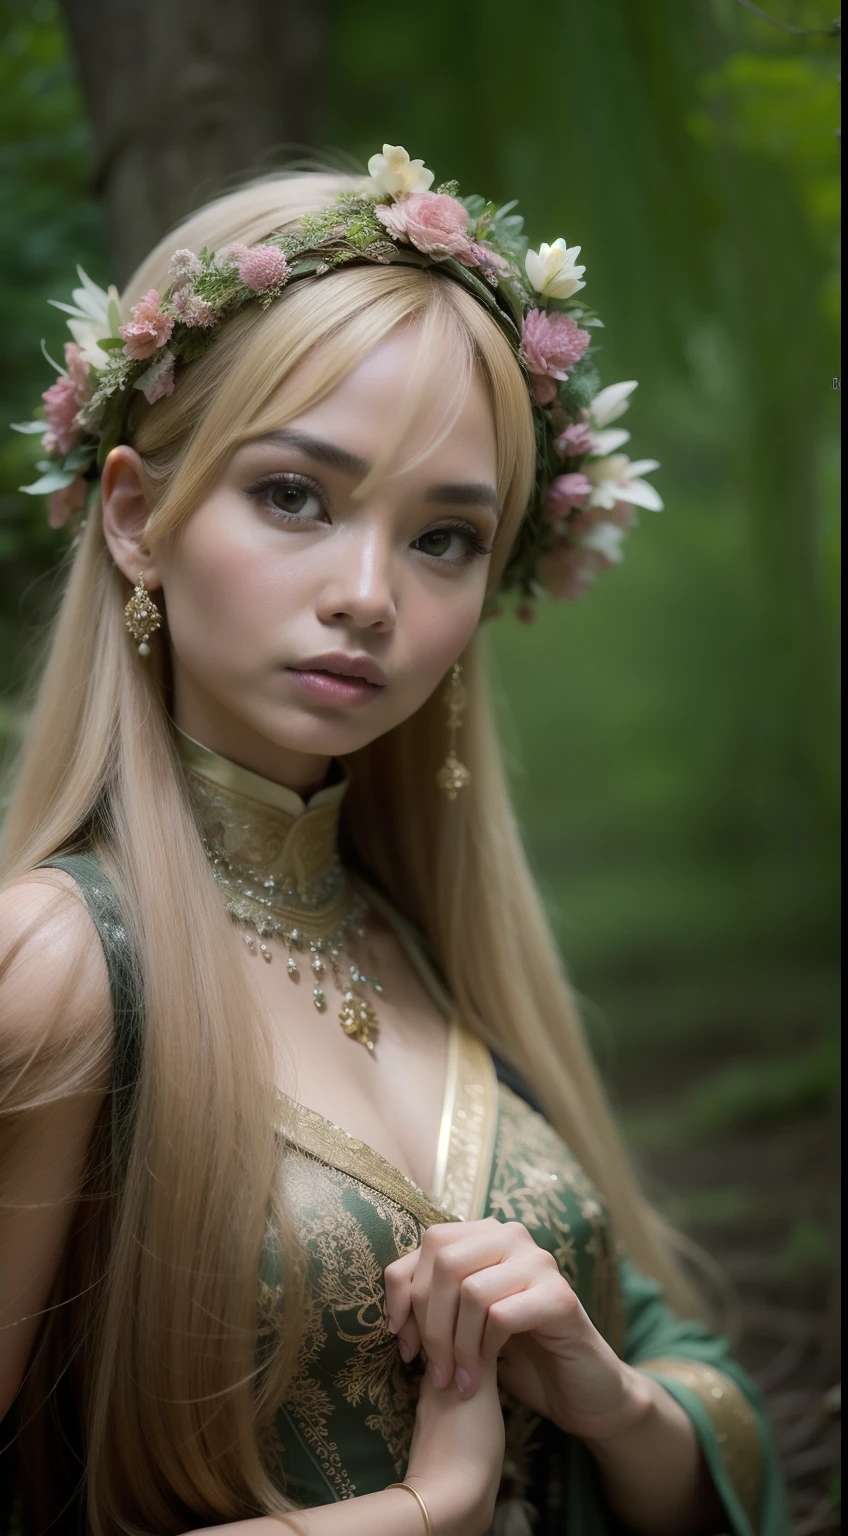 Create a mystical forest portrait with the Malay woman in an ethereal, flowy gown, medium blonde hair with bangs, posed among ancient trees and glowing mushrooms, embodying the enchantment of the woods.